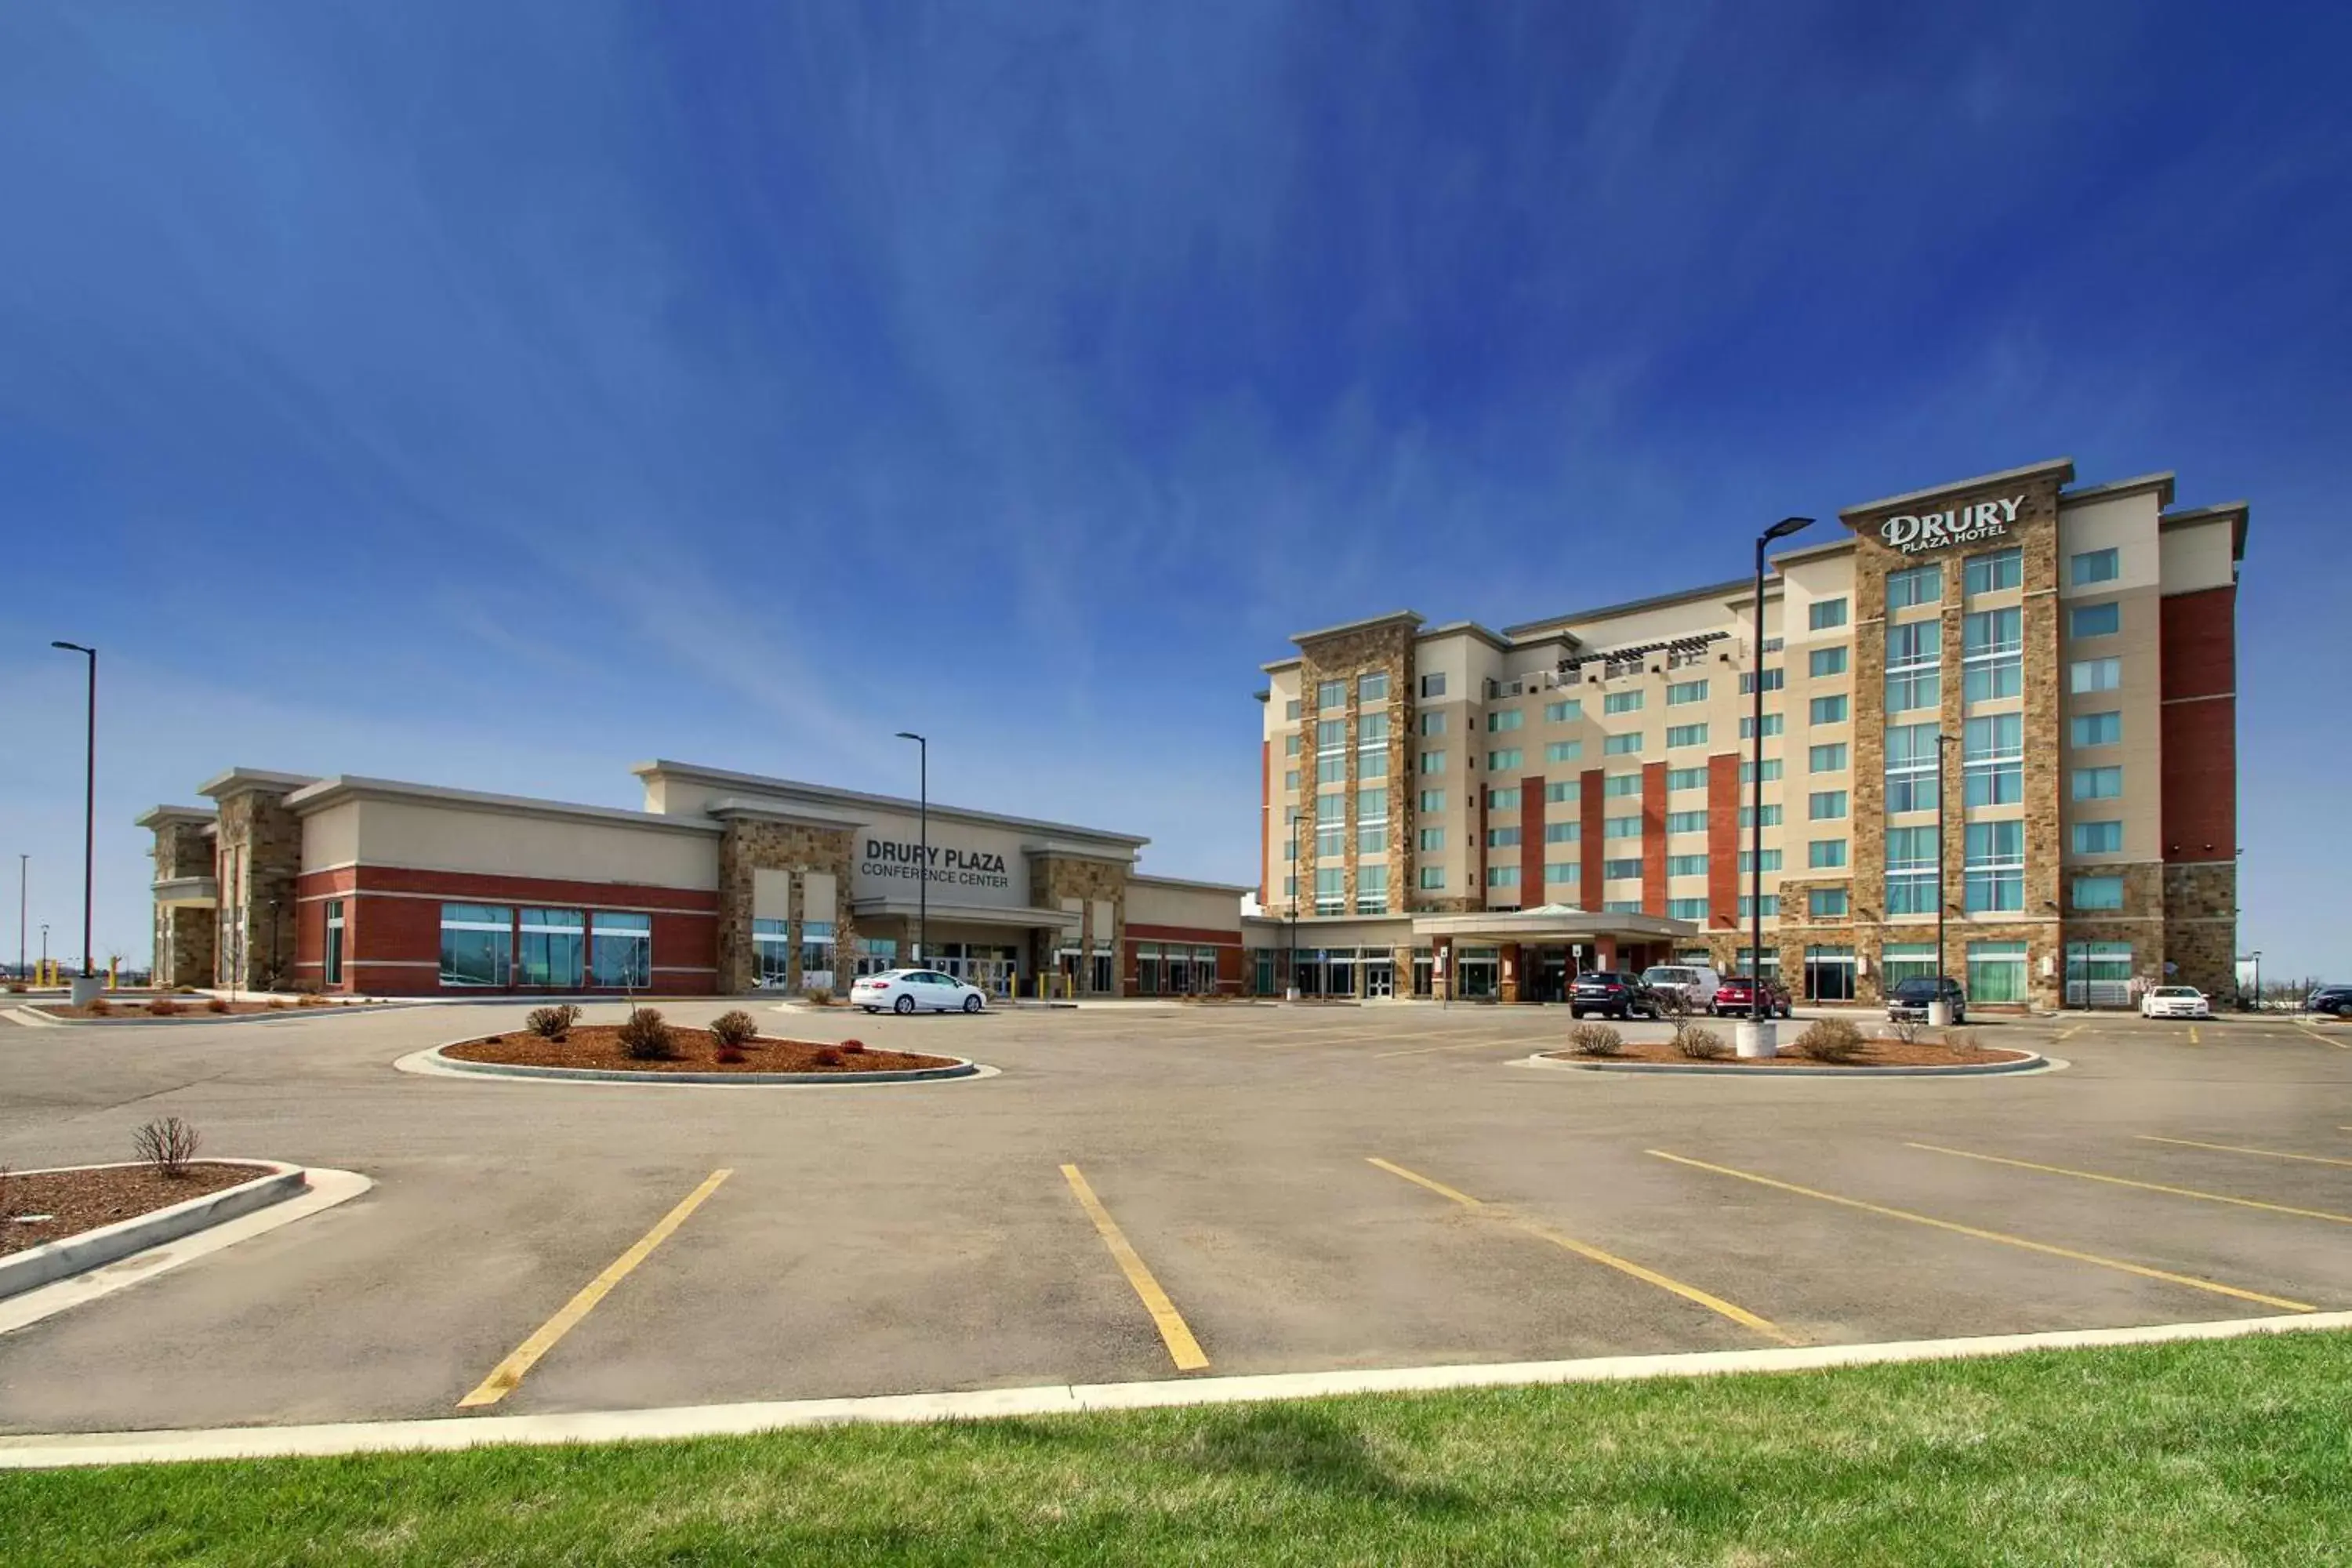 Property building in Drury Plaza Hotel Cape Girardeau Conference Center